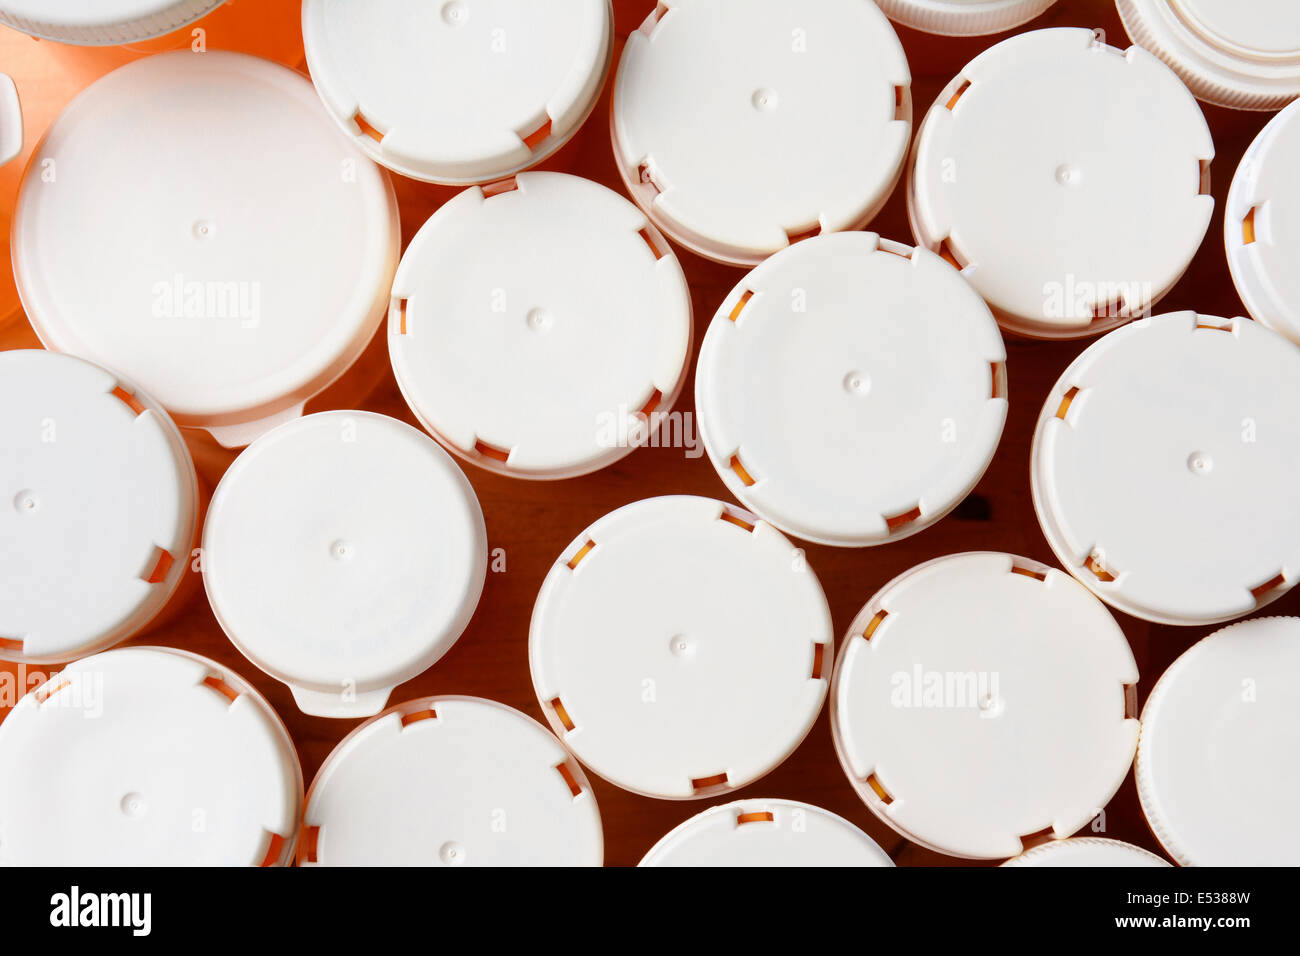 High angle shot of a group of prescription medicine bottles. The tops are blank and are various sizes. Horizontal format Stock Photo